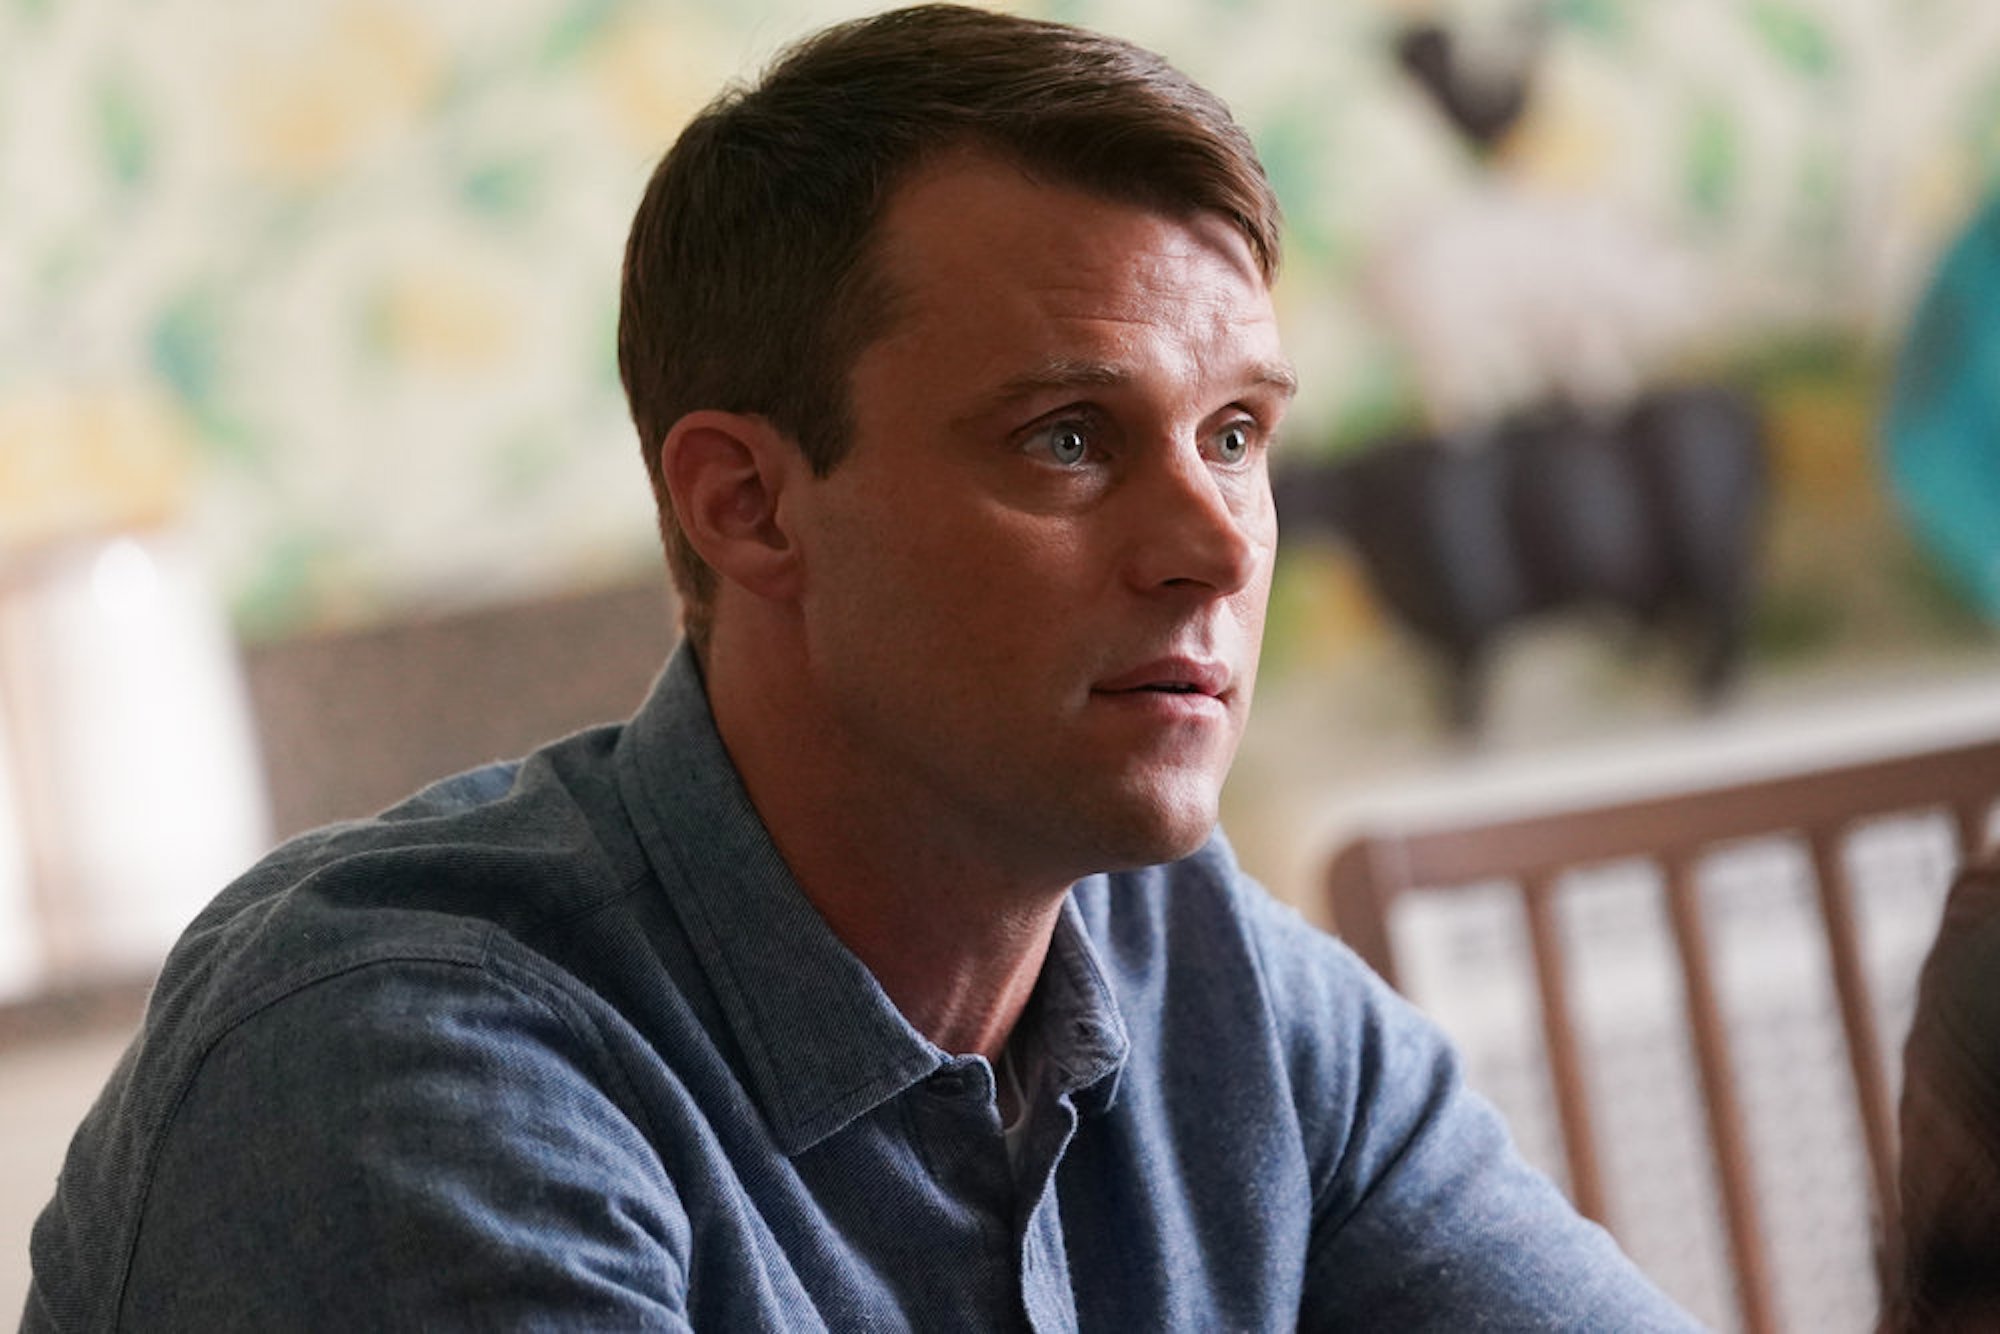 Jesse Spencer as Matthew Casey in 'Chicago Fire' Season 10. 'Chicago Fire' Episode 200 featured Casey's exit